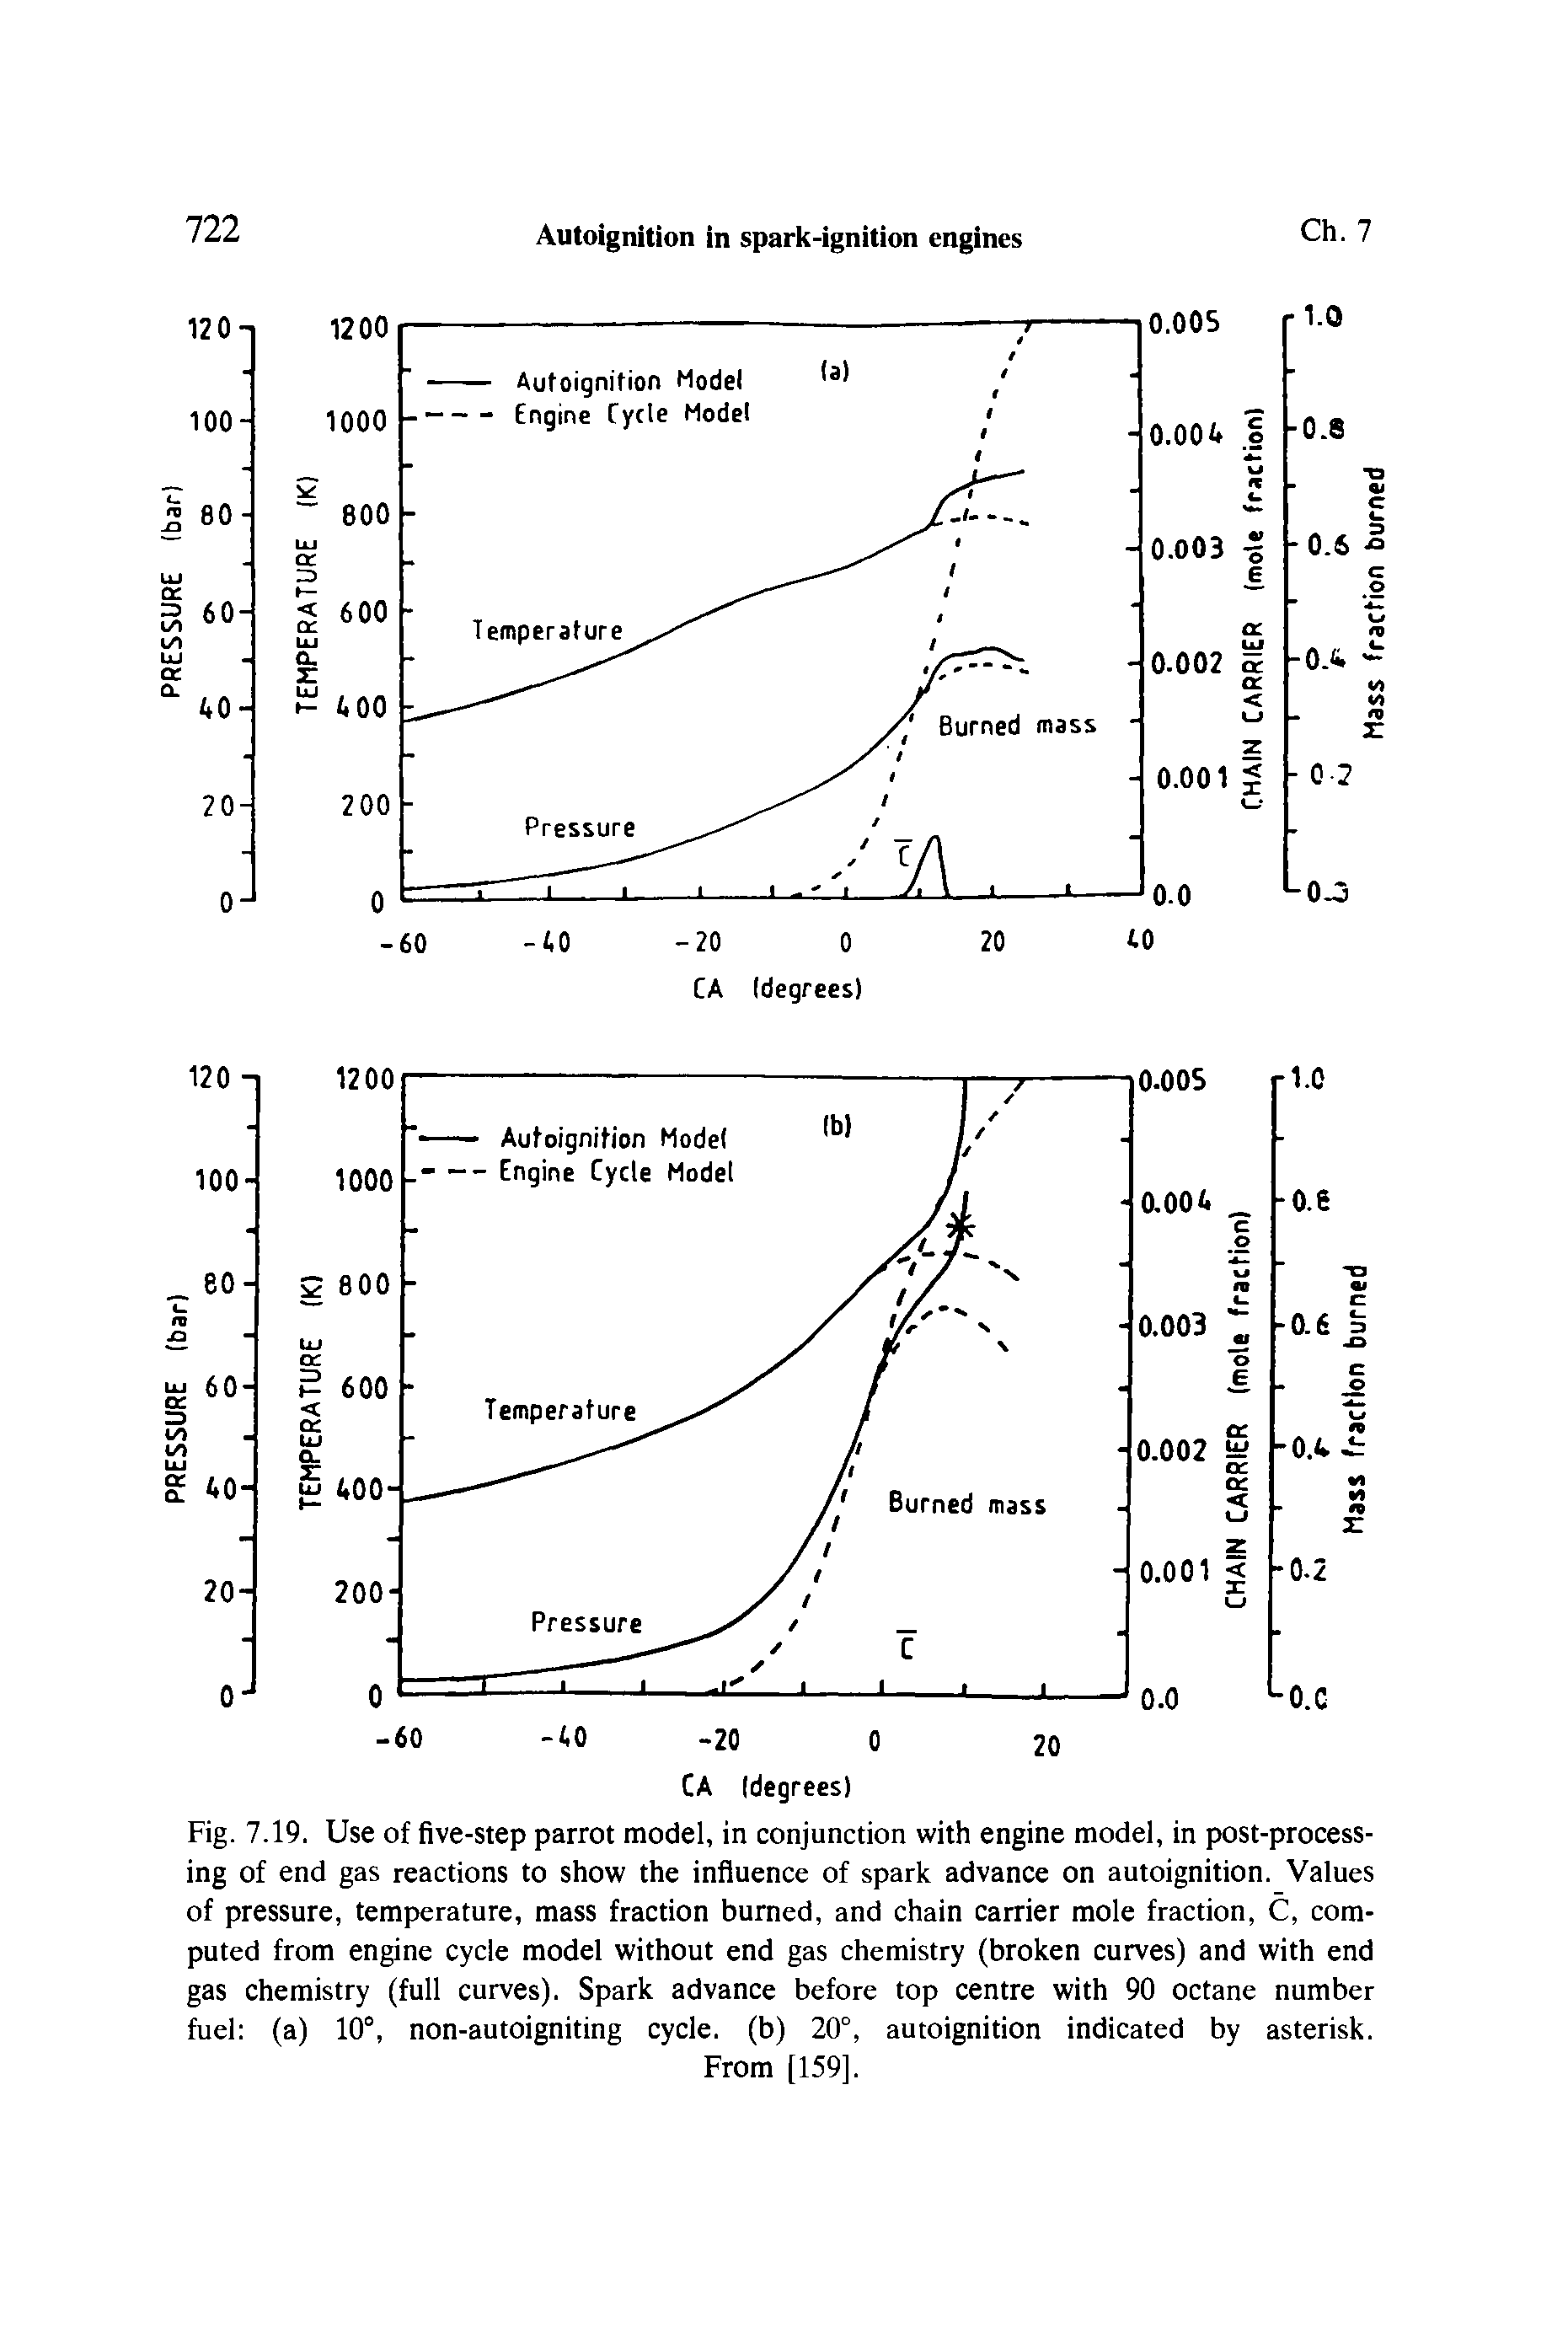 Fig. 7.19. Use of five-step parrot model, in conjunction with engine model, in post-processing of end gas reactions to show the influence of spark advance on autoignition. Values of pressure, temperature, mass fraction burned, and chain carrier mole fraction, C, computed from engine cycle model without end gas chemistry (broken curves) and with end gas chemistry (full curves). Spark advance before top centre with 90 octane number fuel (a) 10°, non-autoigniting cycle, (b) 20°, autoignition indicated by asterisk.